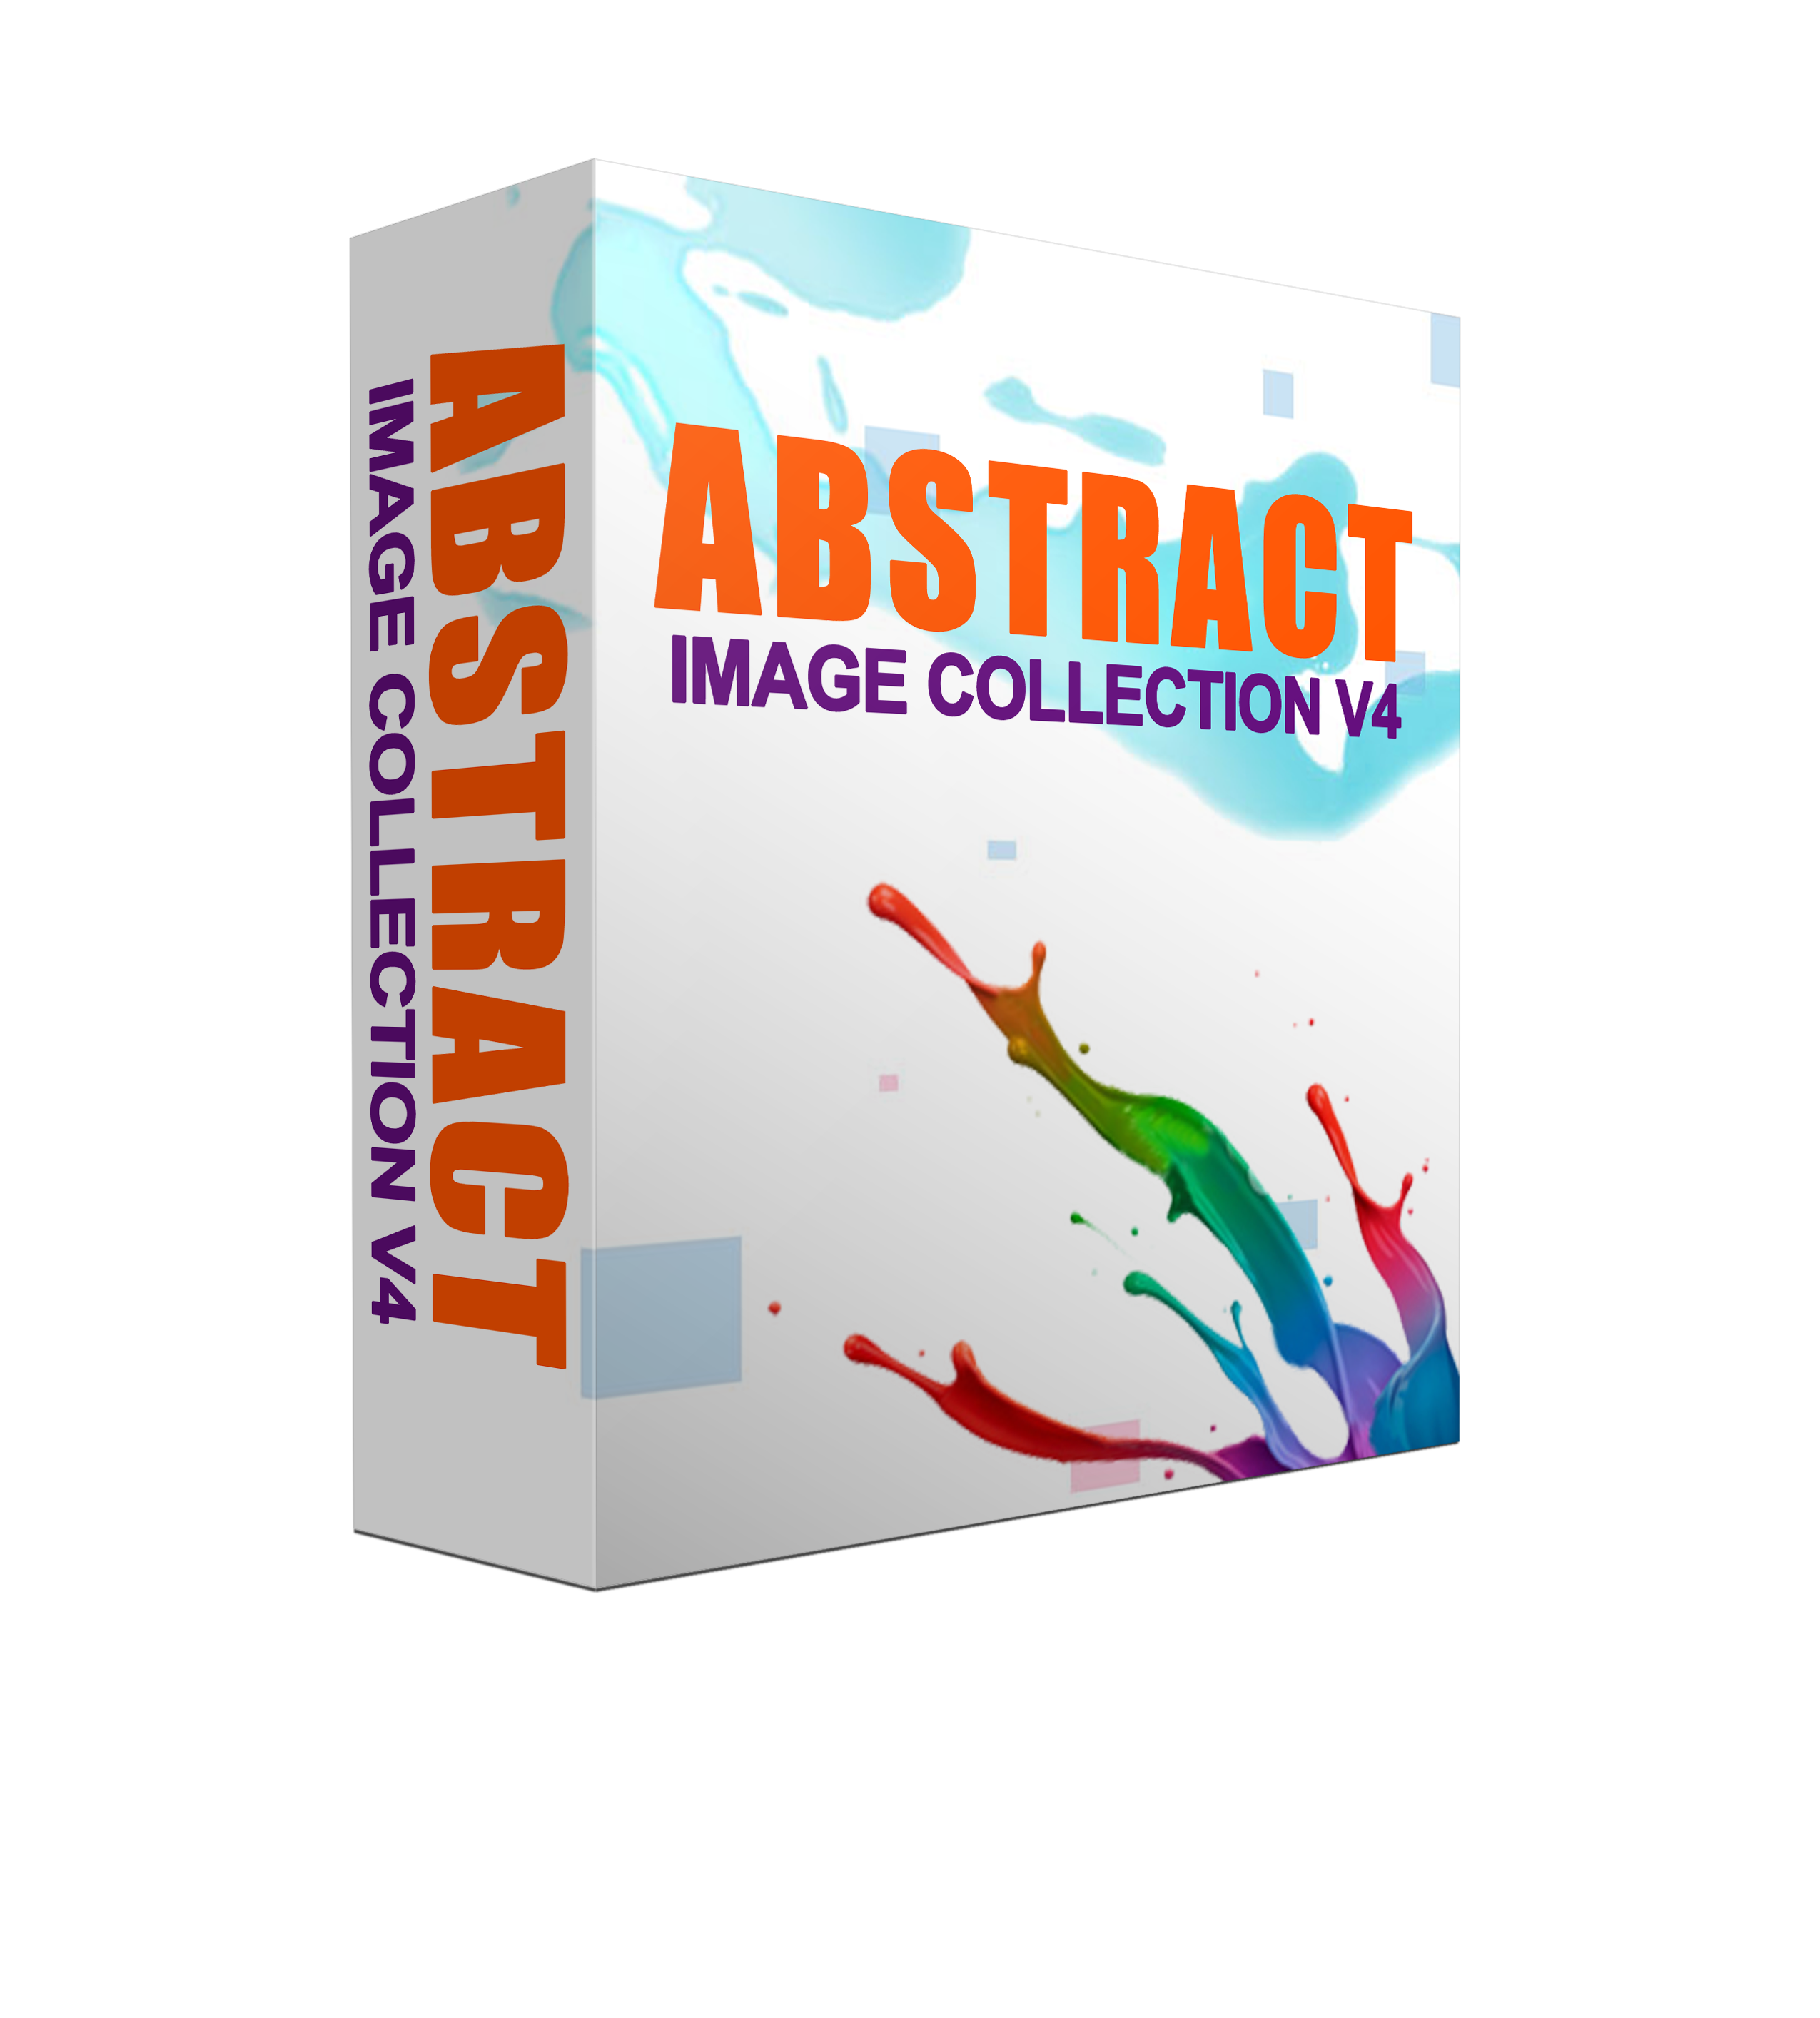 Abstract Image Collection V4